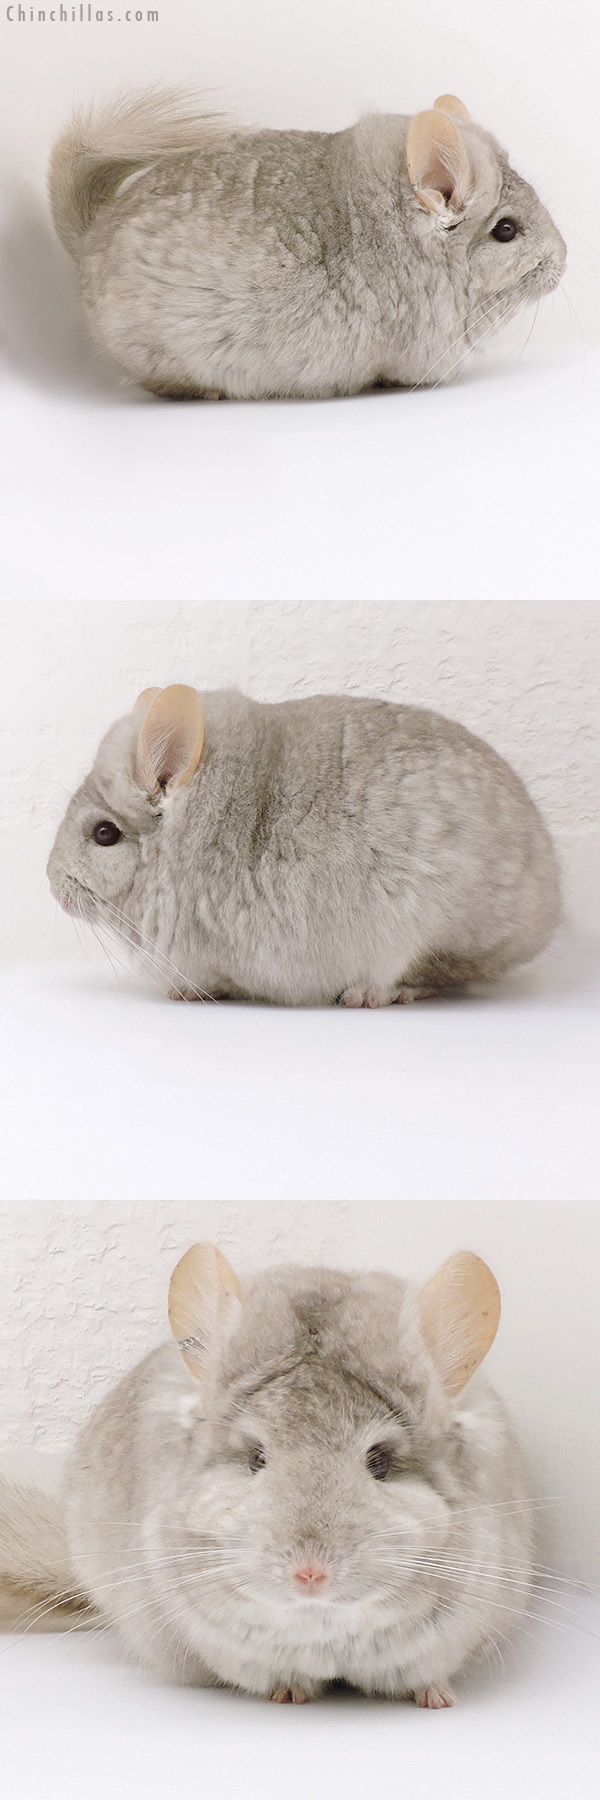 Chinchilla or related item offered for sale or export on Chinchillas.com - 18222 Blocky Beige  Royal Persian Angora Male Chinchilla